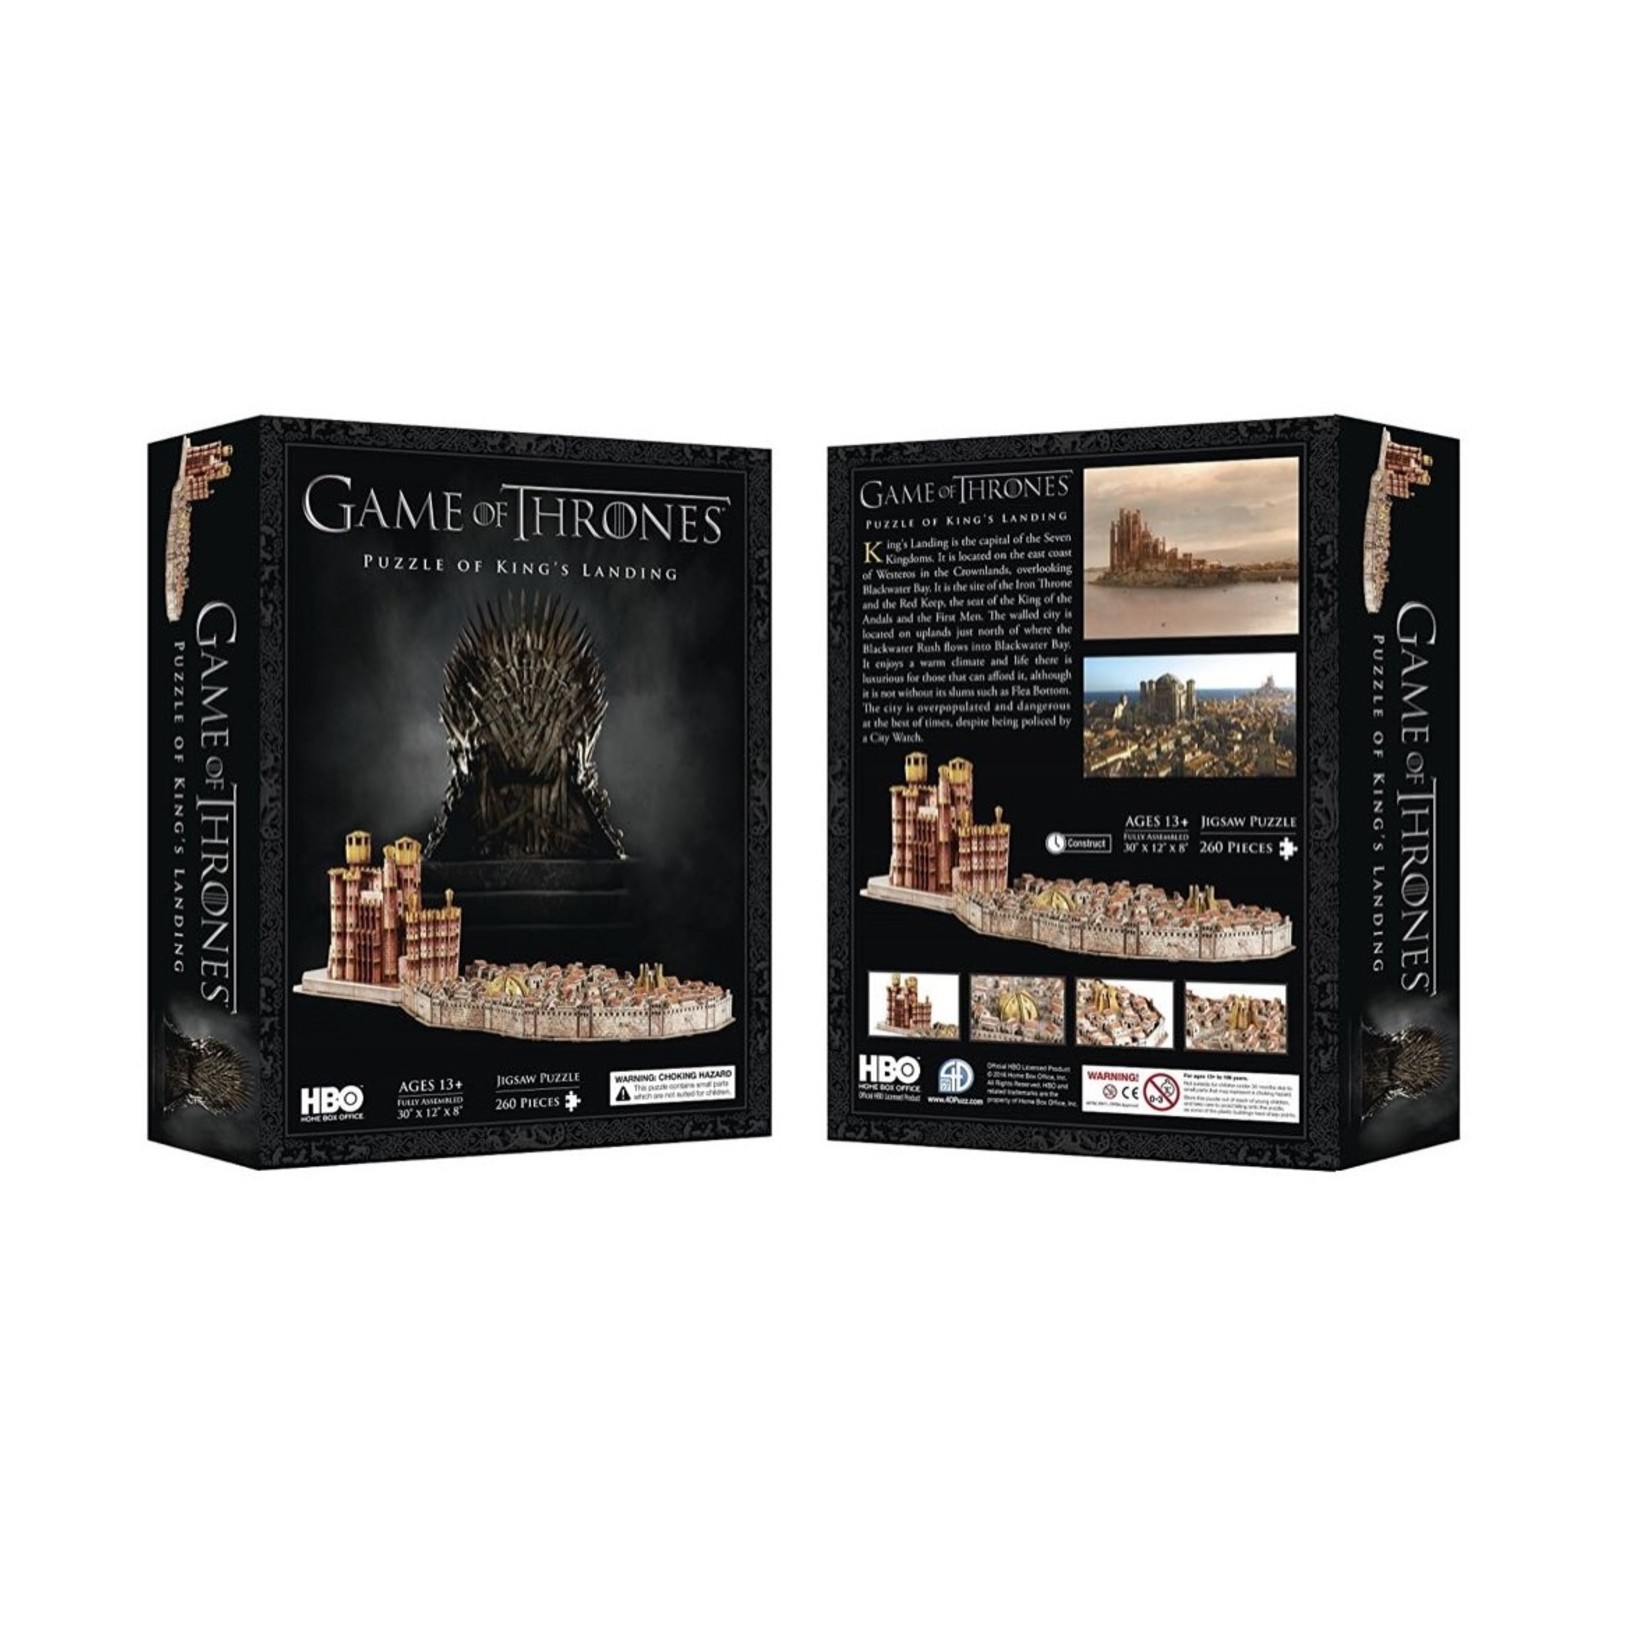 Hbo Home Box Office PZ3D260 - Game Of Thrones - King's landing